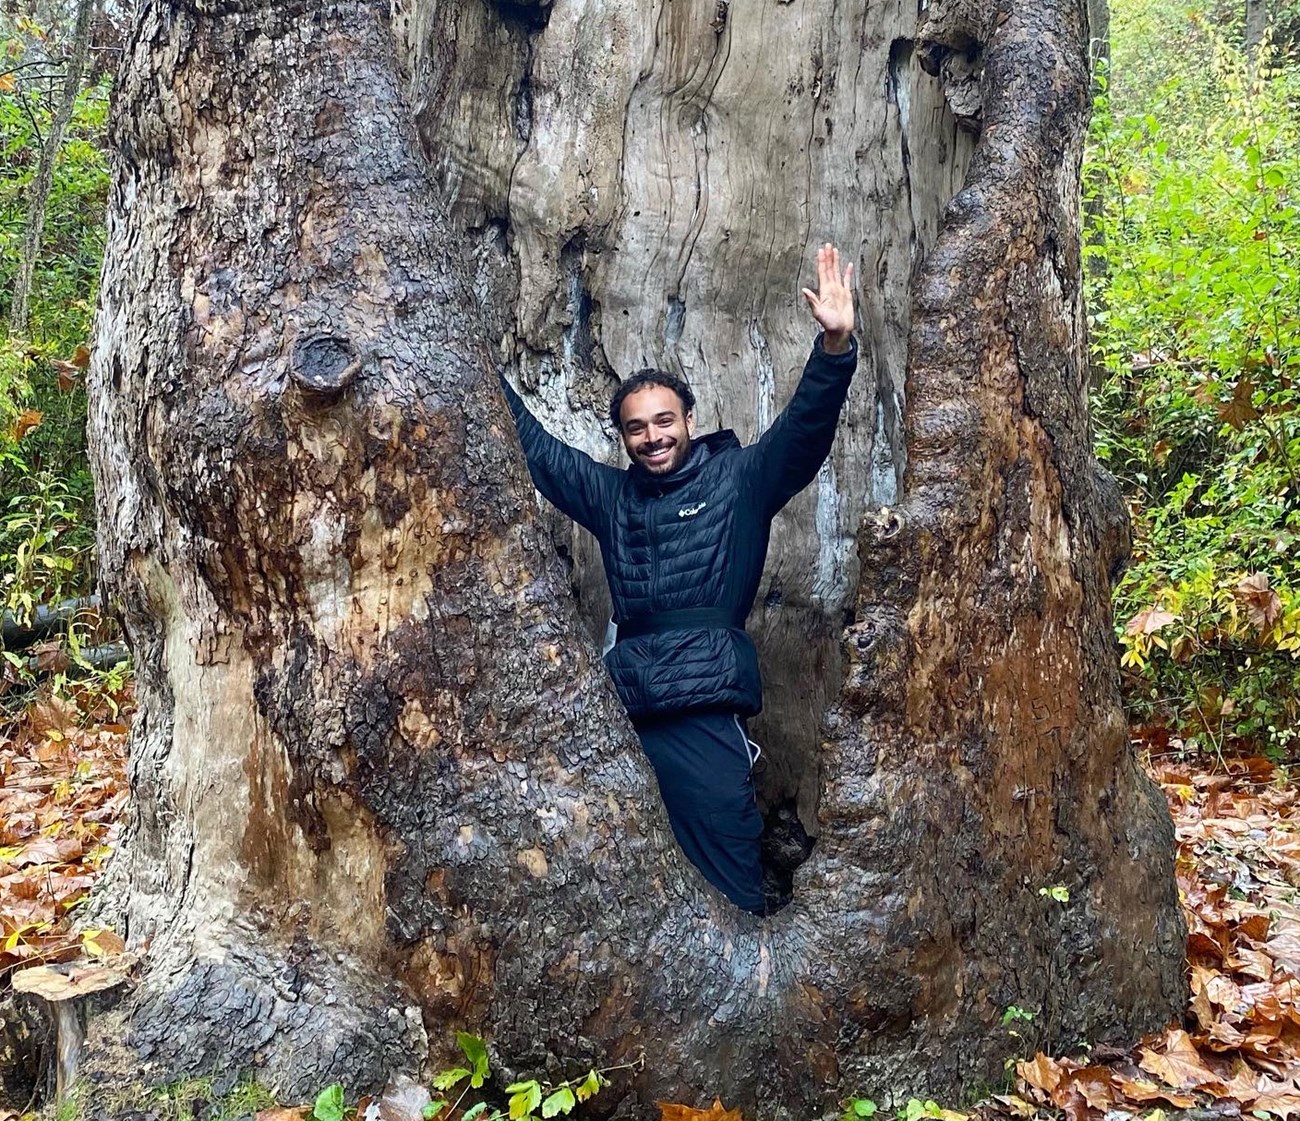 A youthful, bearded man smiles and raises his arms as he poses inside the hollow trunk of a massive tree.